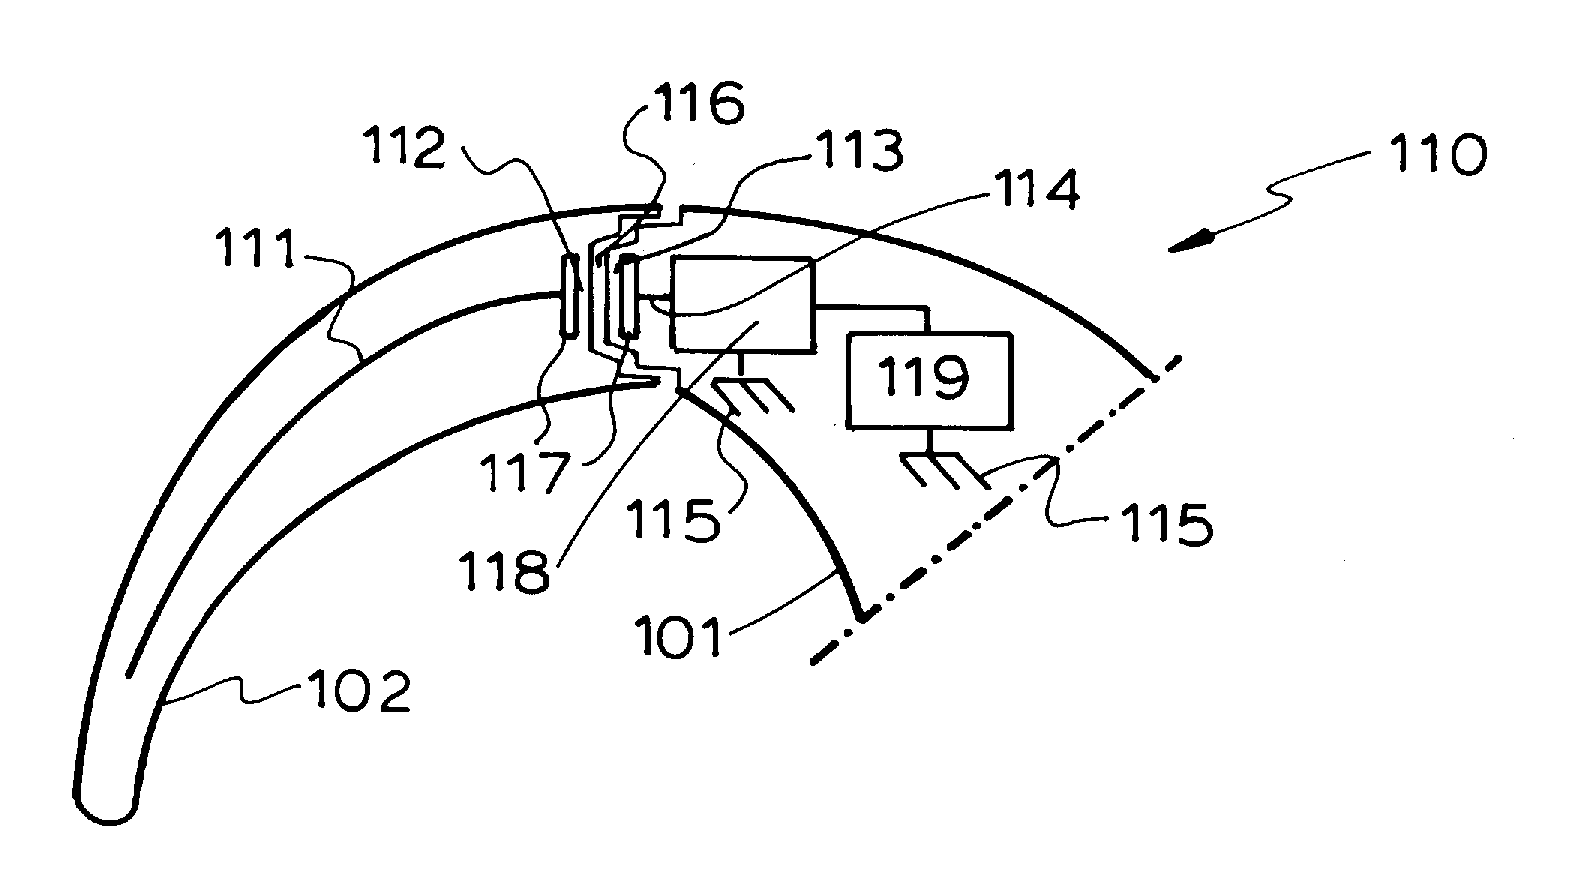 Antenna for behind-the-ear (BTE) devices